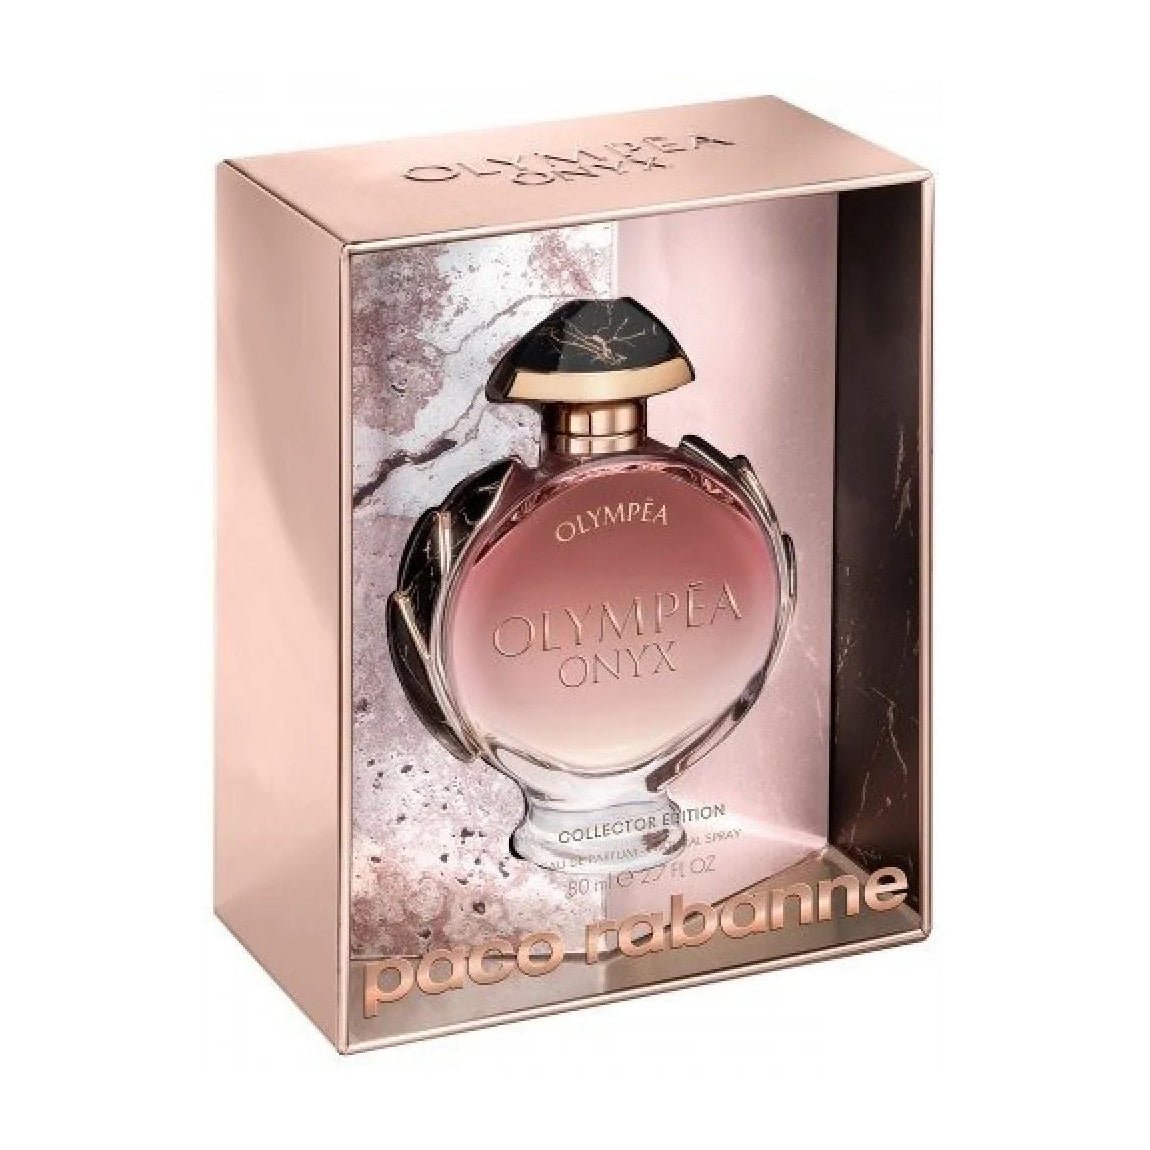 Paco Rabanne Olympea Onyx Collector Edition EDP For Women – 80ml - Bloom Pharmacy